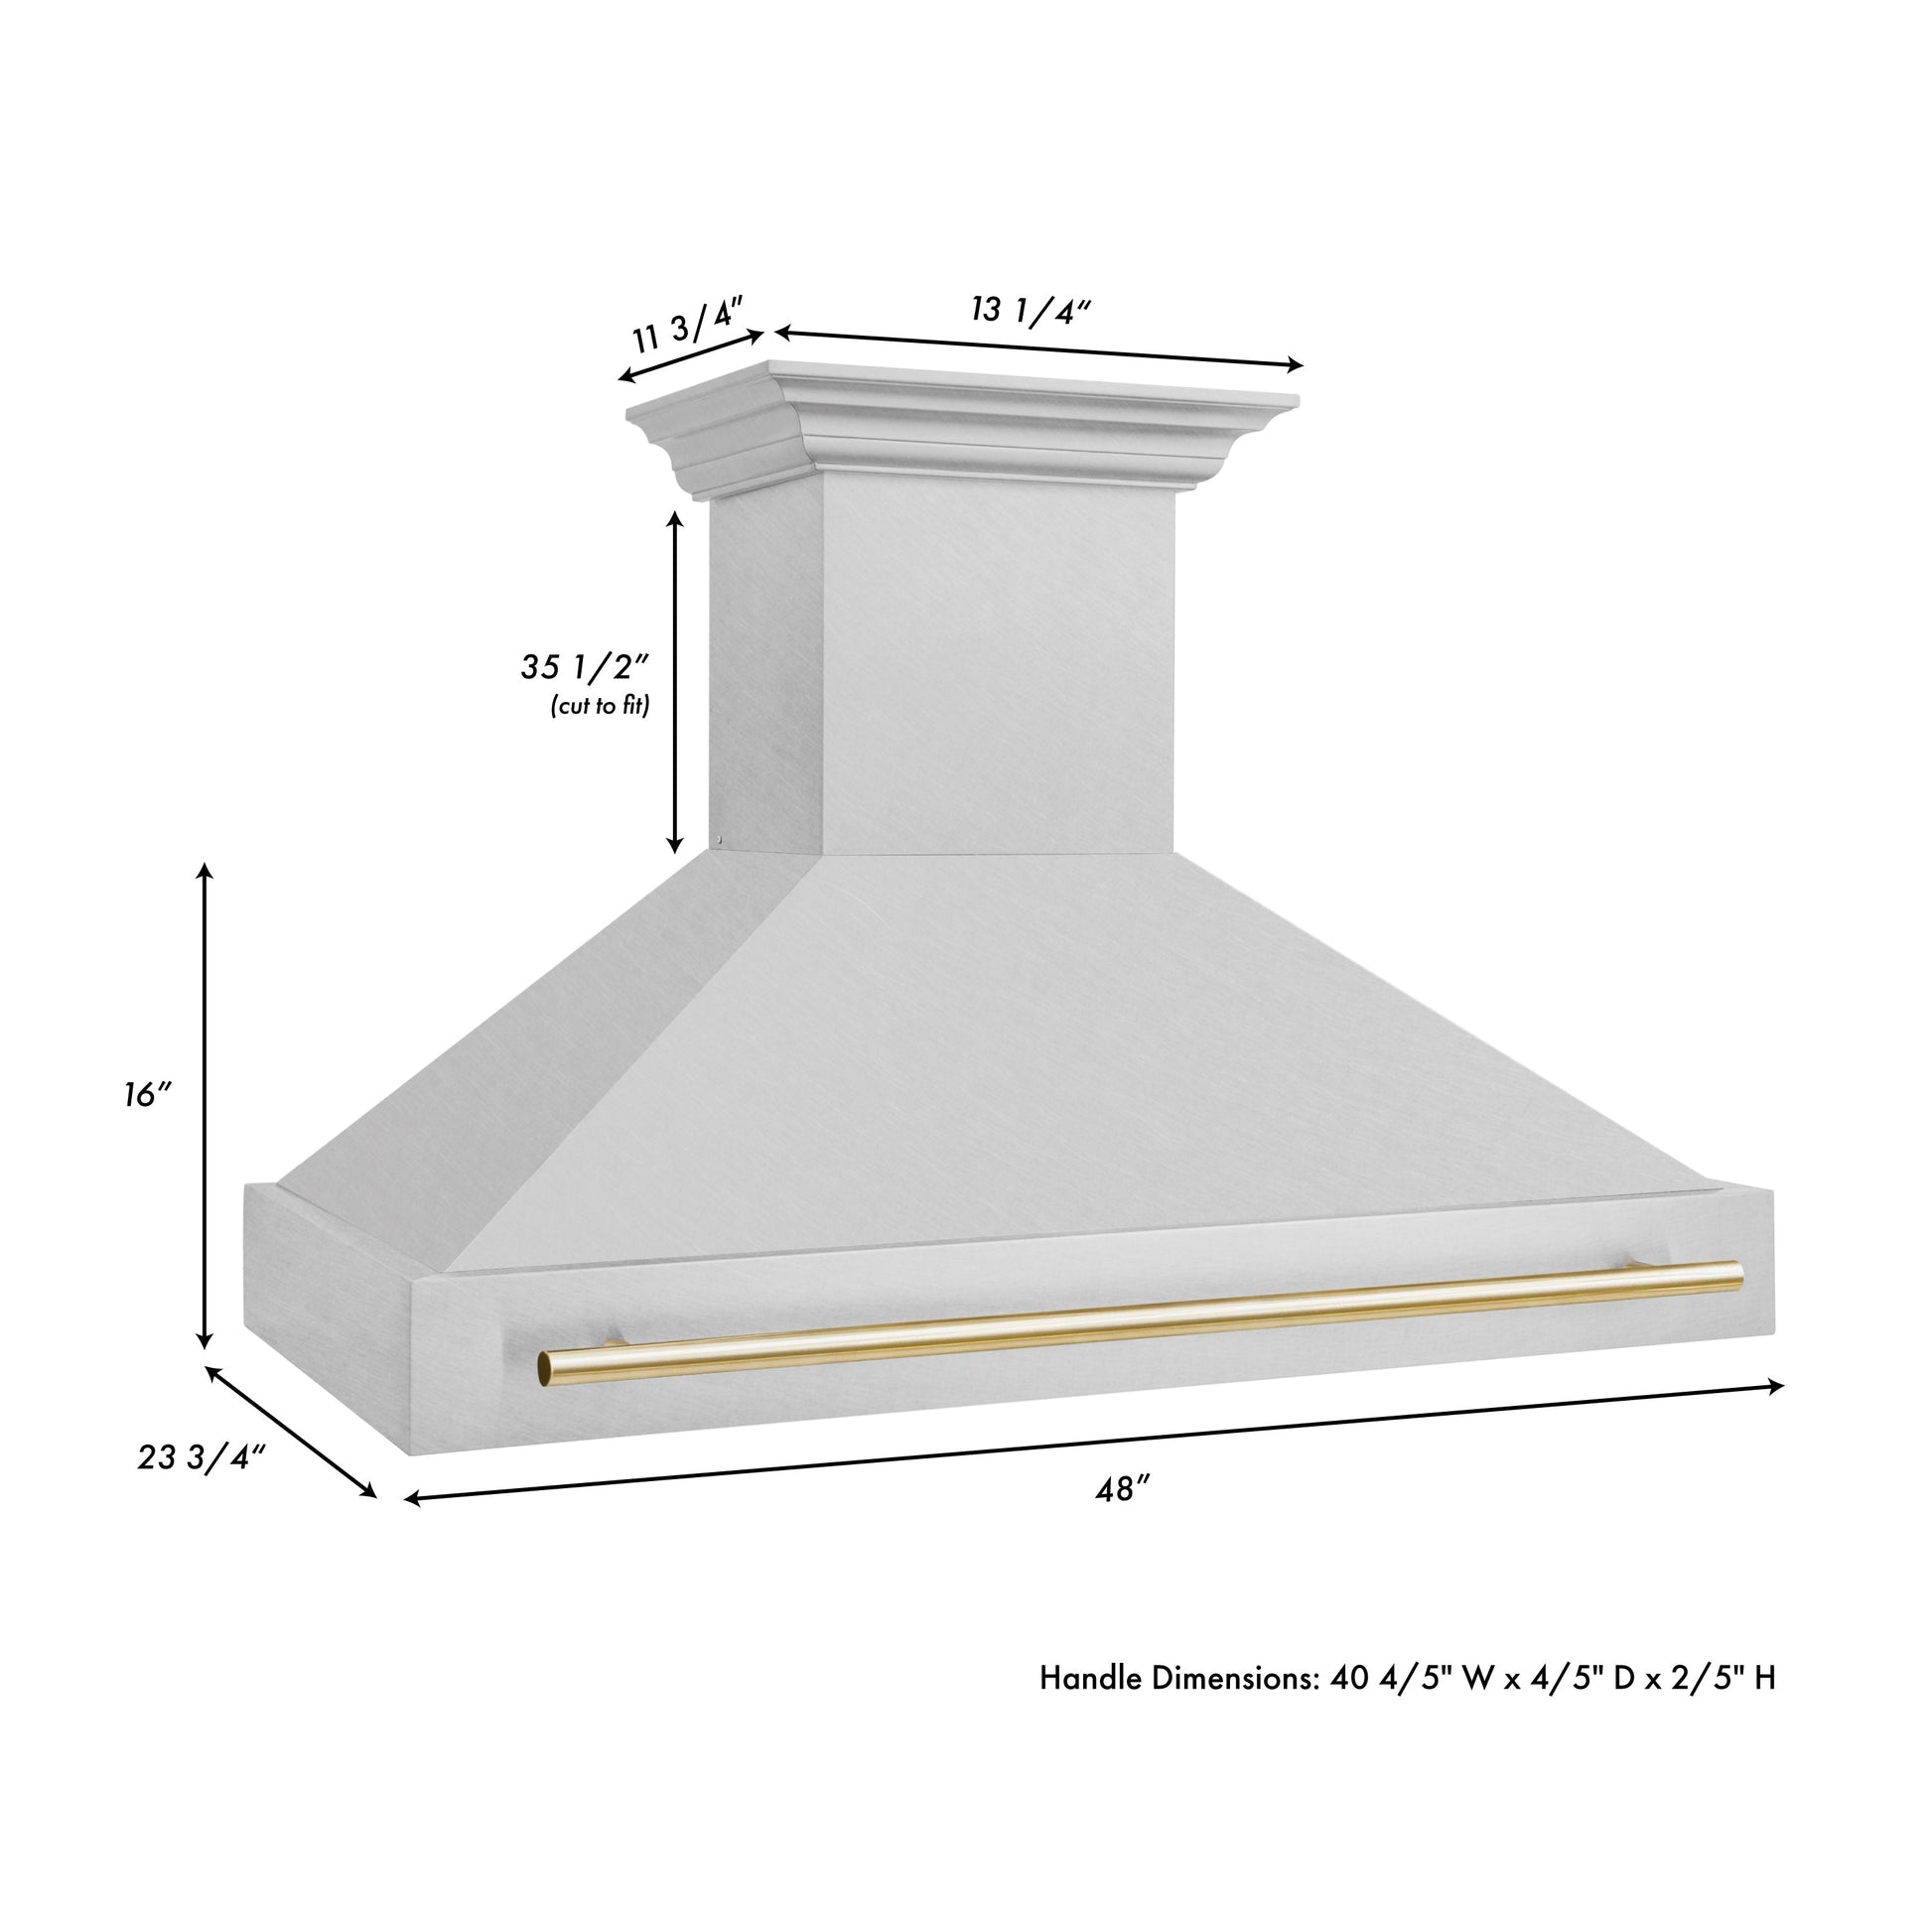 ZLINE Autograph Edition 48" DuraSnow Stainless Steel 4-speed 700 CFM Range Hood With LED Lighting and Gold Handle